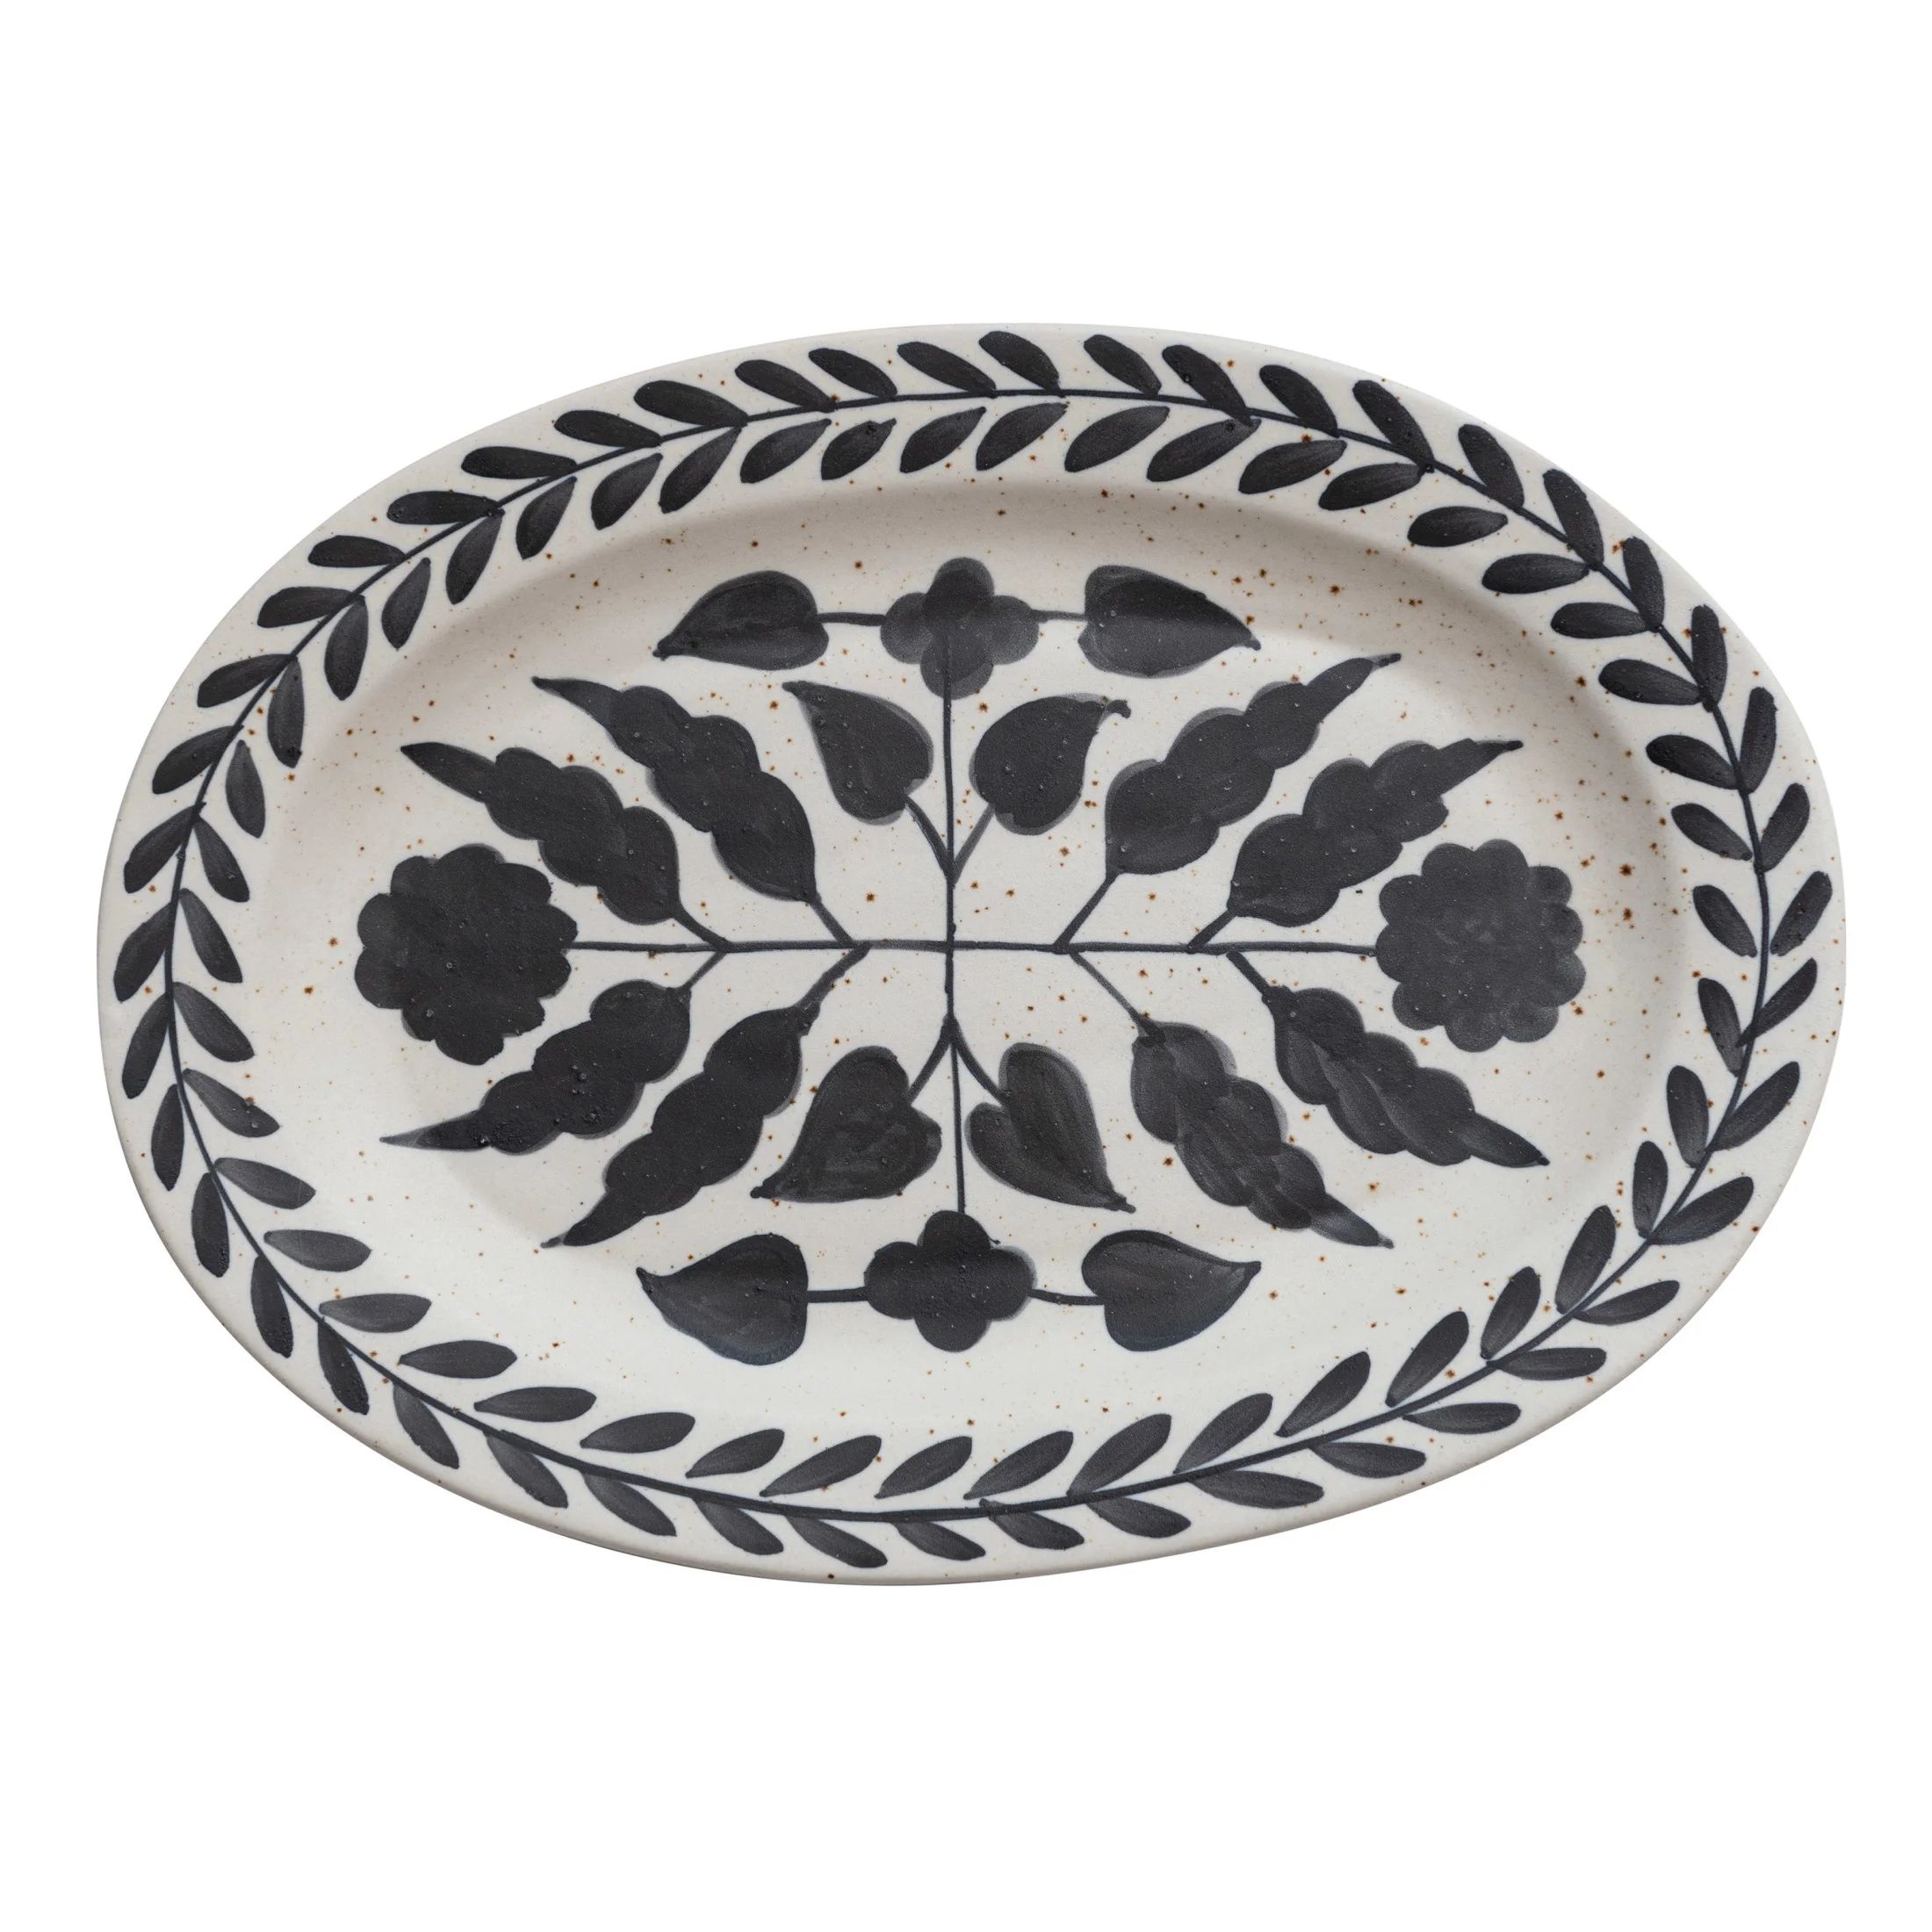 Creative Co-Op Hand Painted Stoneware Platter with Floral Design, Black and White | Walmart (US)